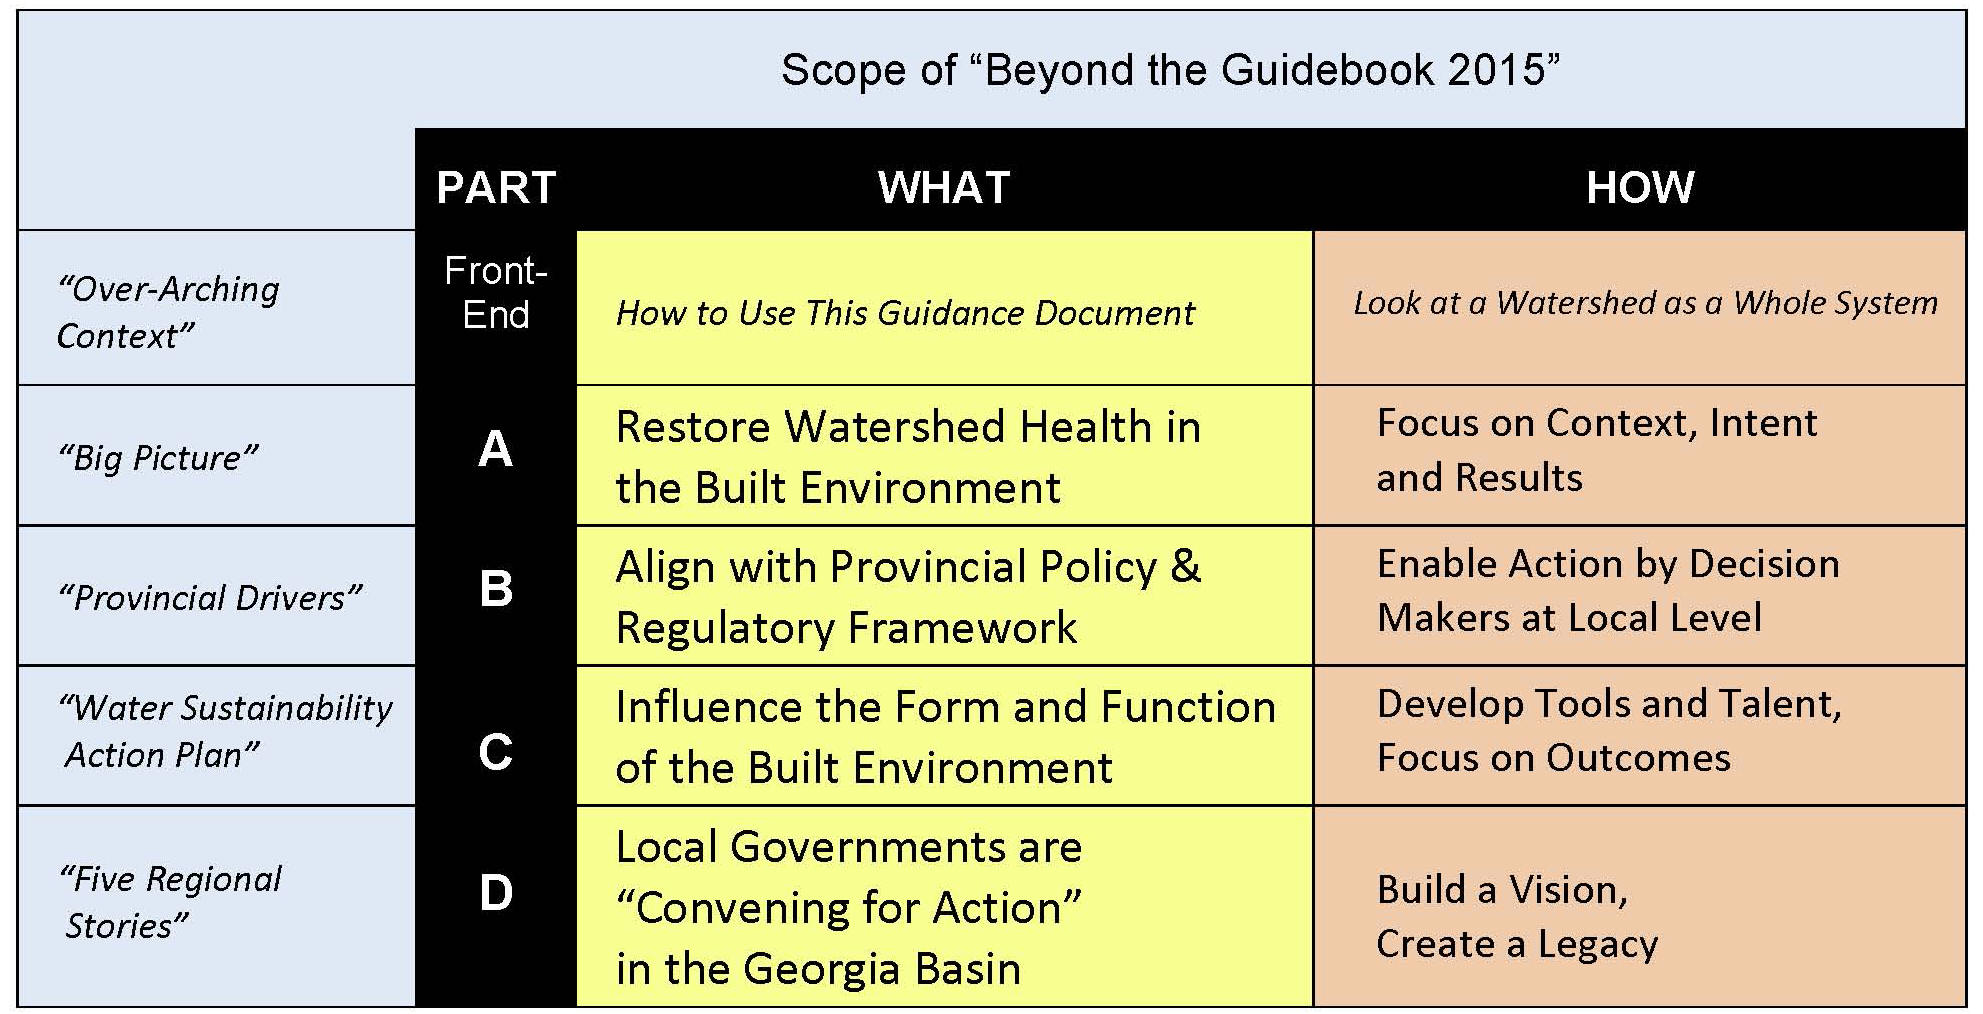 BYGB2015_scope of 4 parts